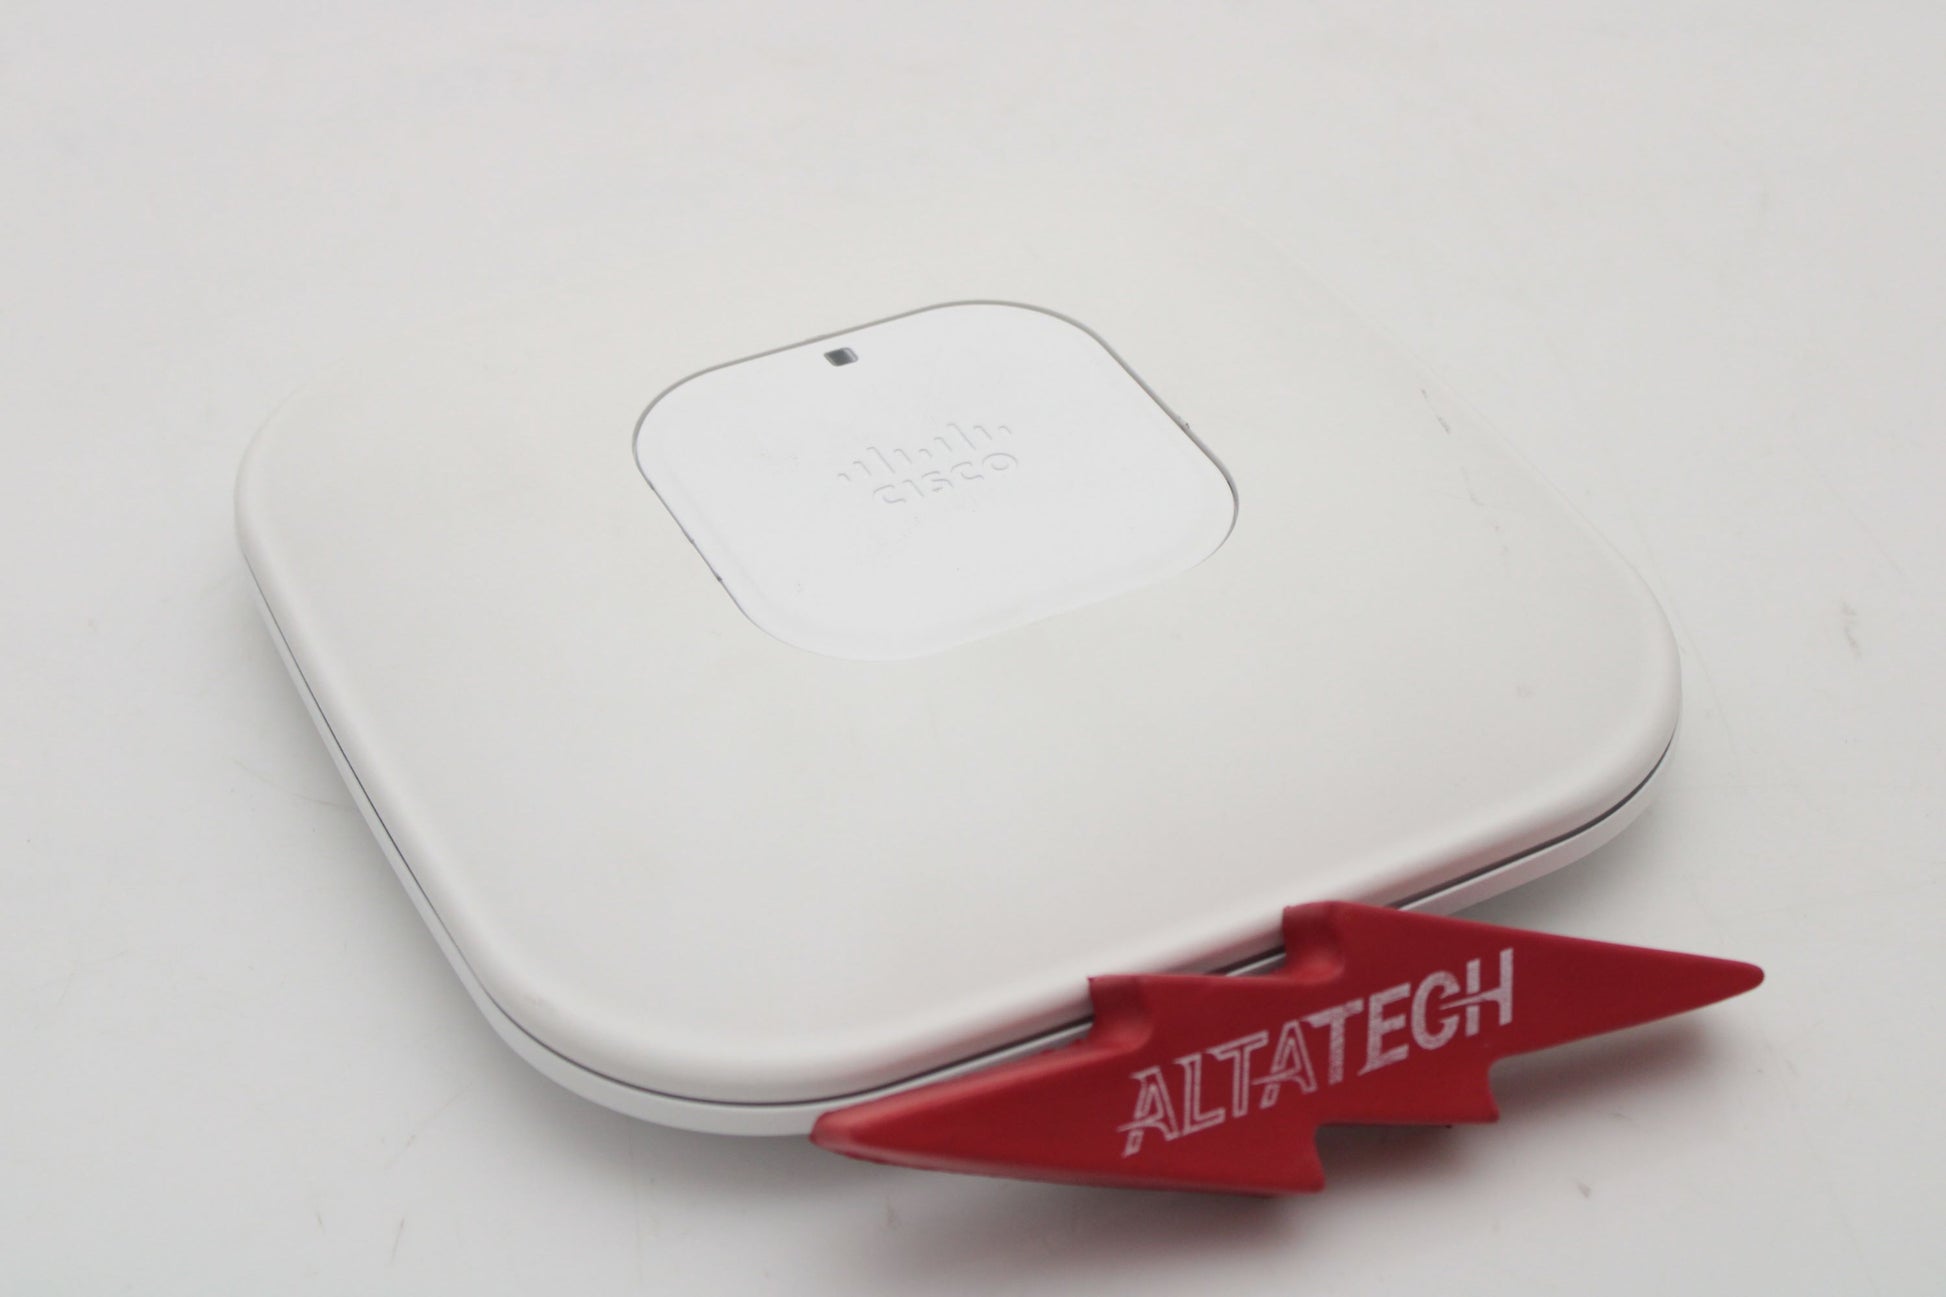 Cisco AIR-CAP3502I-A-K9 Aironet W/CLEN Wireless Access Point, Used